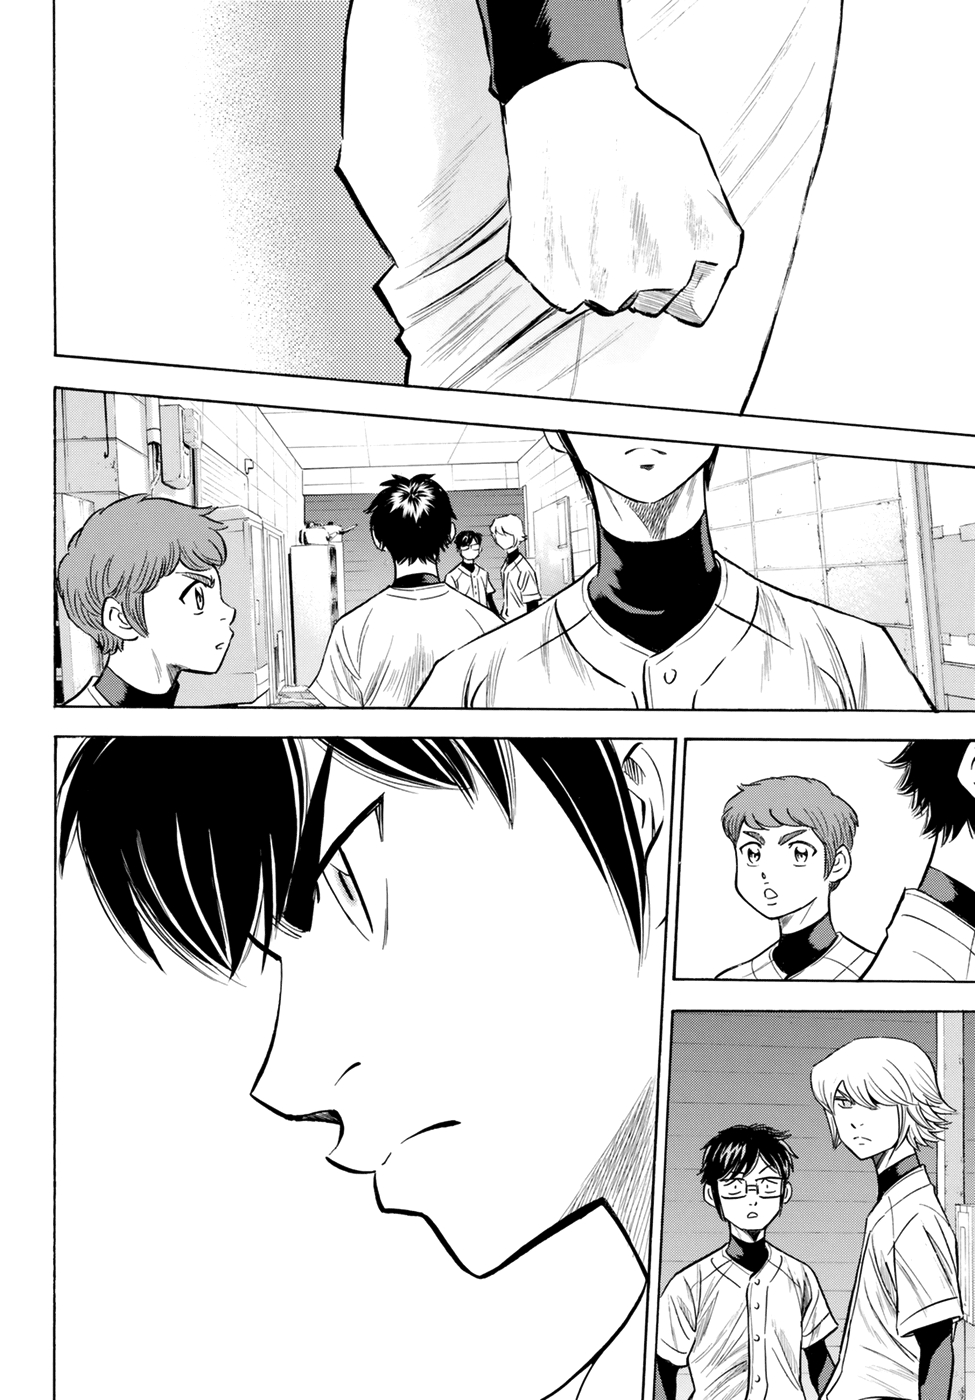 Diamond no Ace Act II Vol. 9 Ch. 83 Bloom of Youth